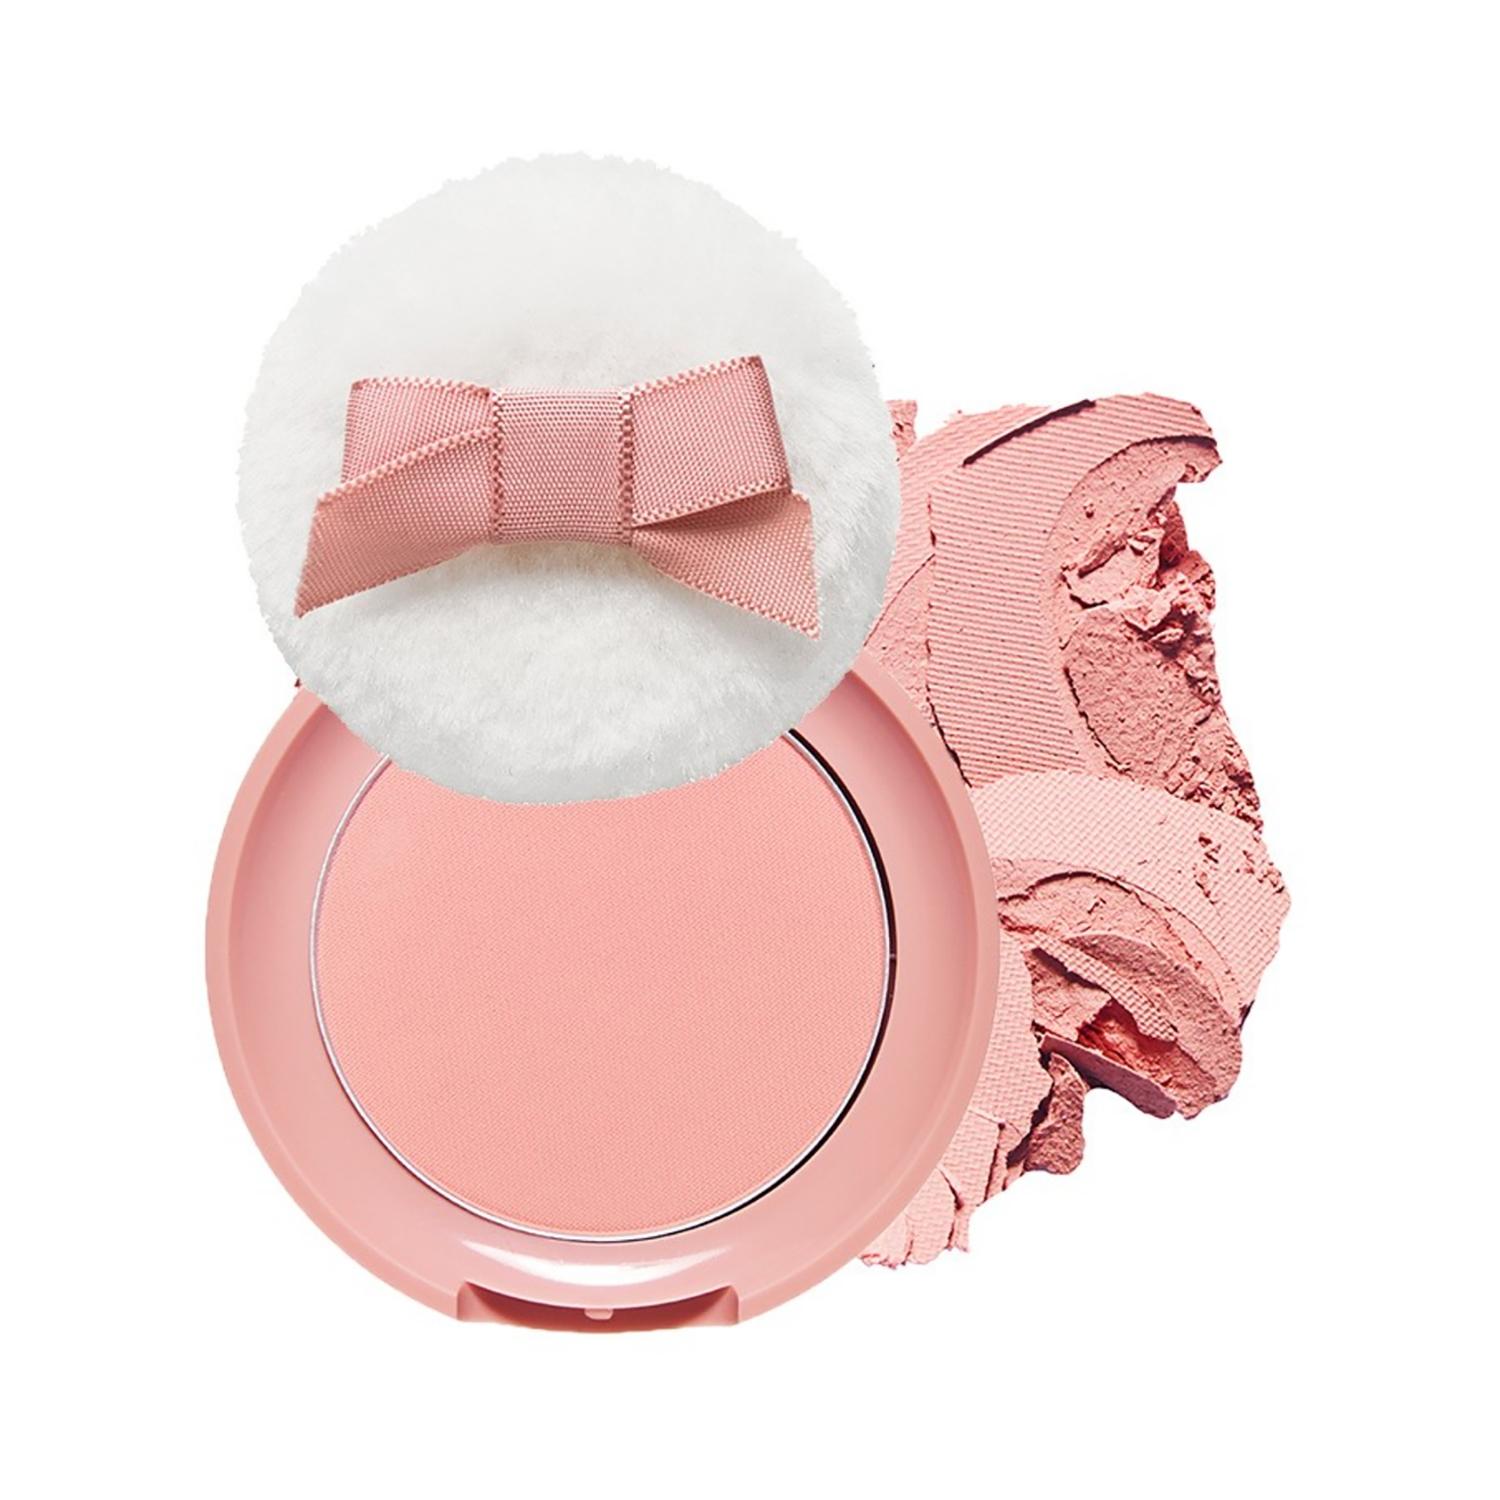 etude-lovely-cookie-blusher---pk004-peach-choux-wafers-(4g)